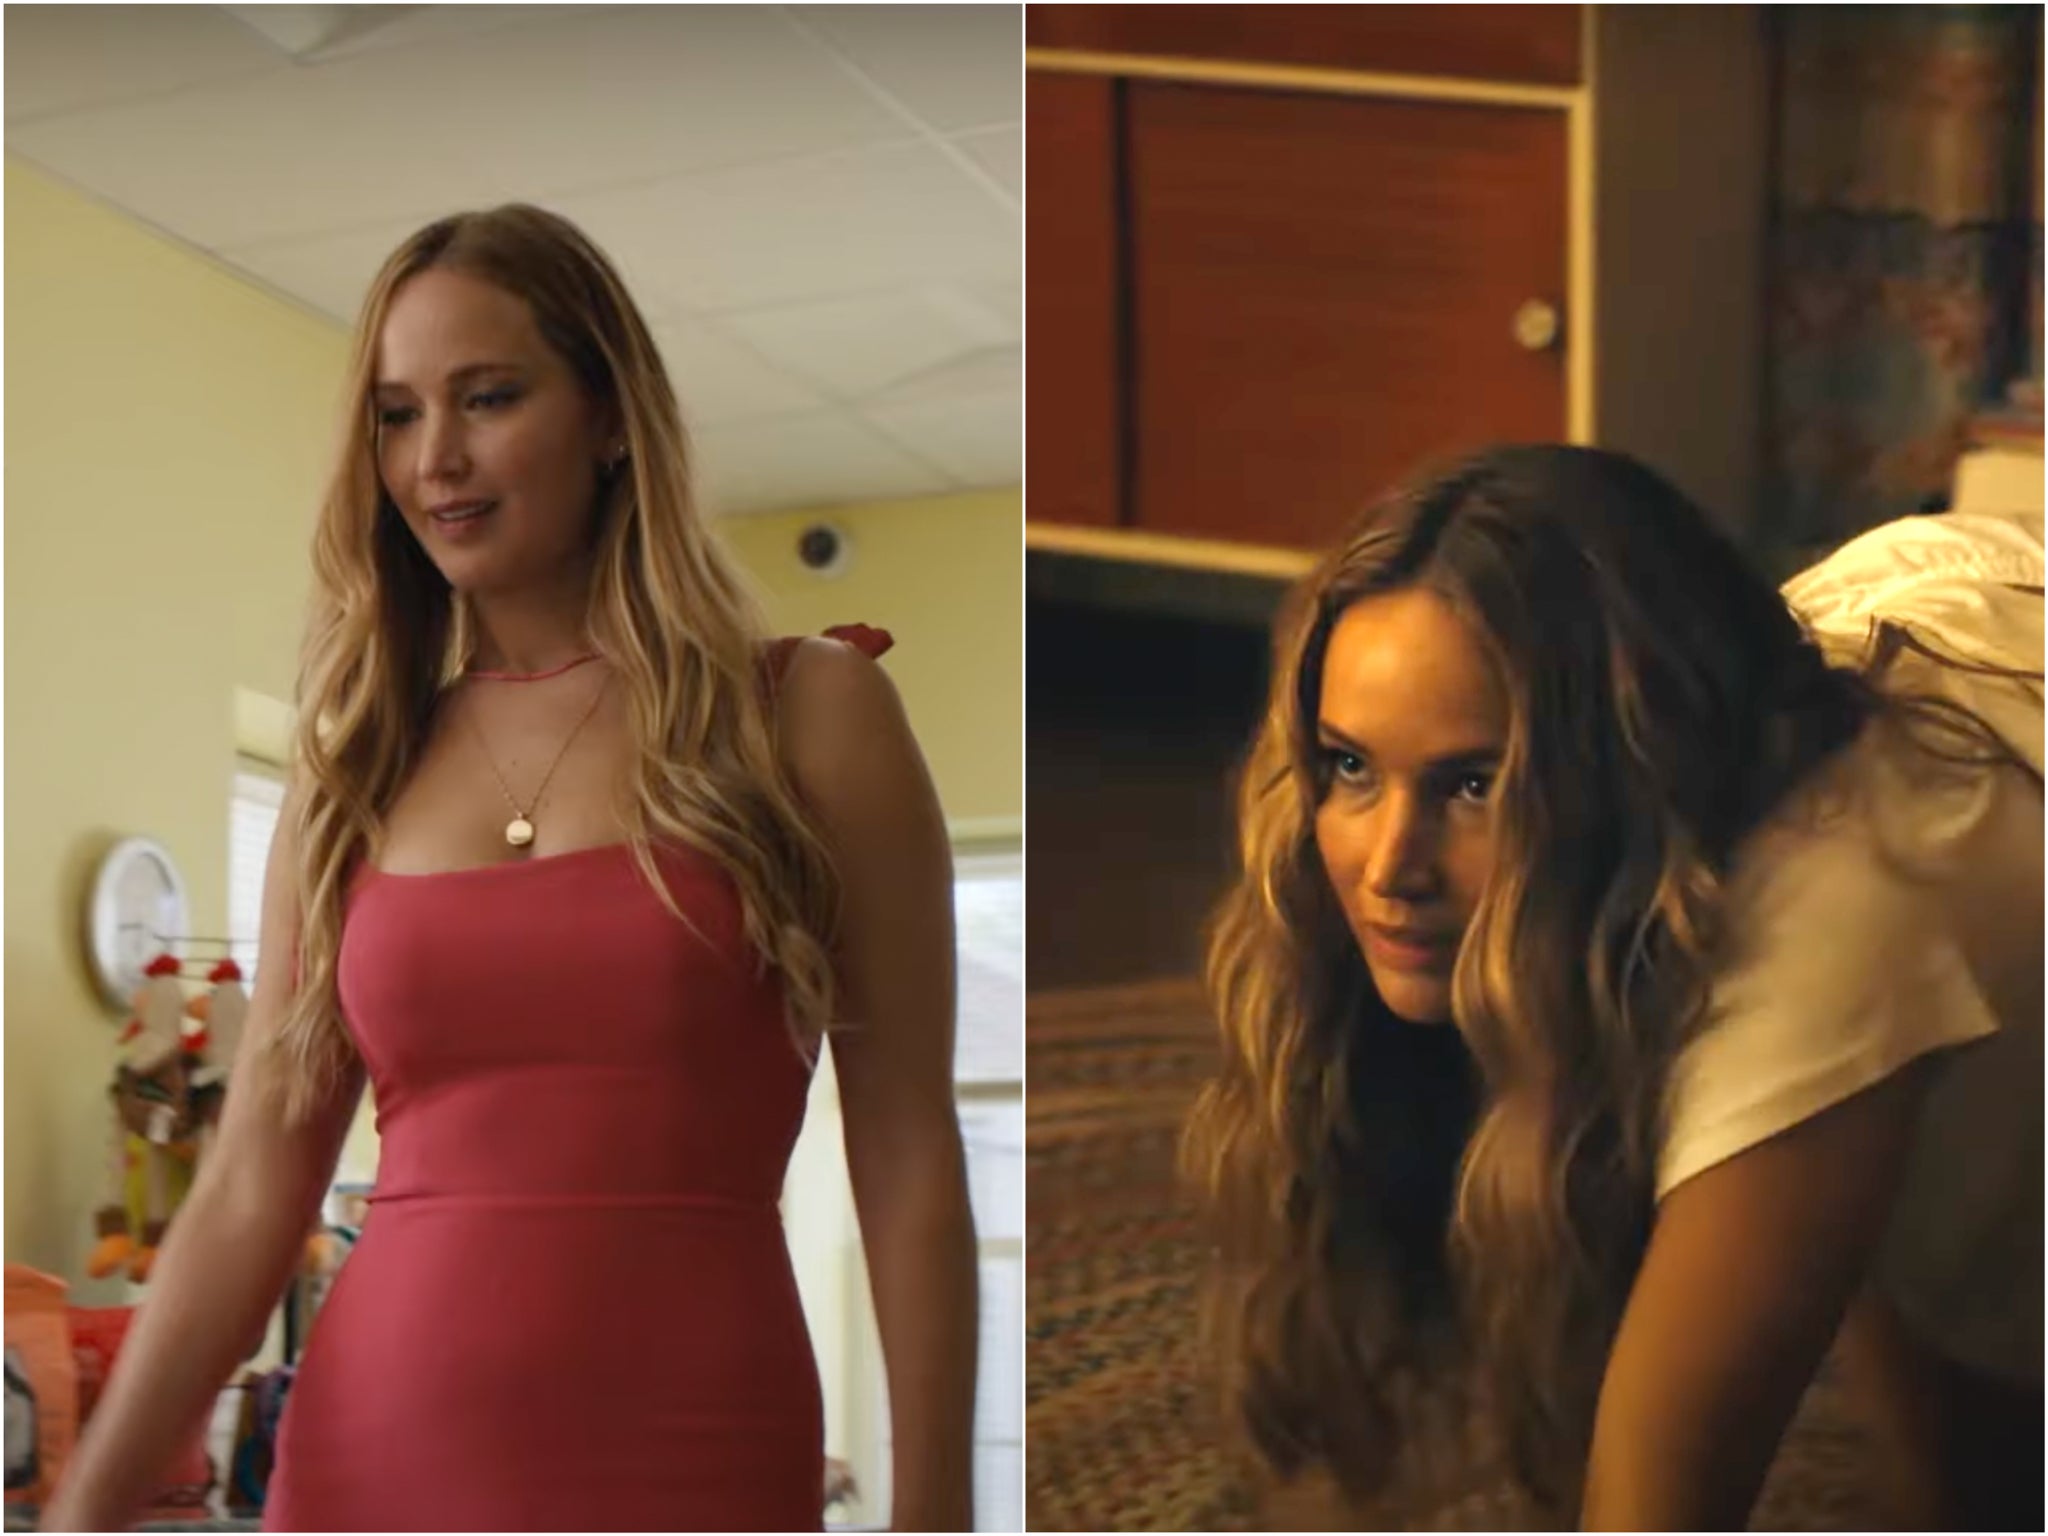 No Hard Feelings Jennifer Lawrence is hired to seduce a 19-year-old boy in new trailer The Independent image